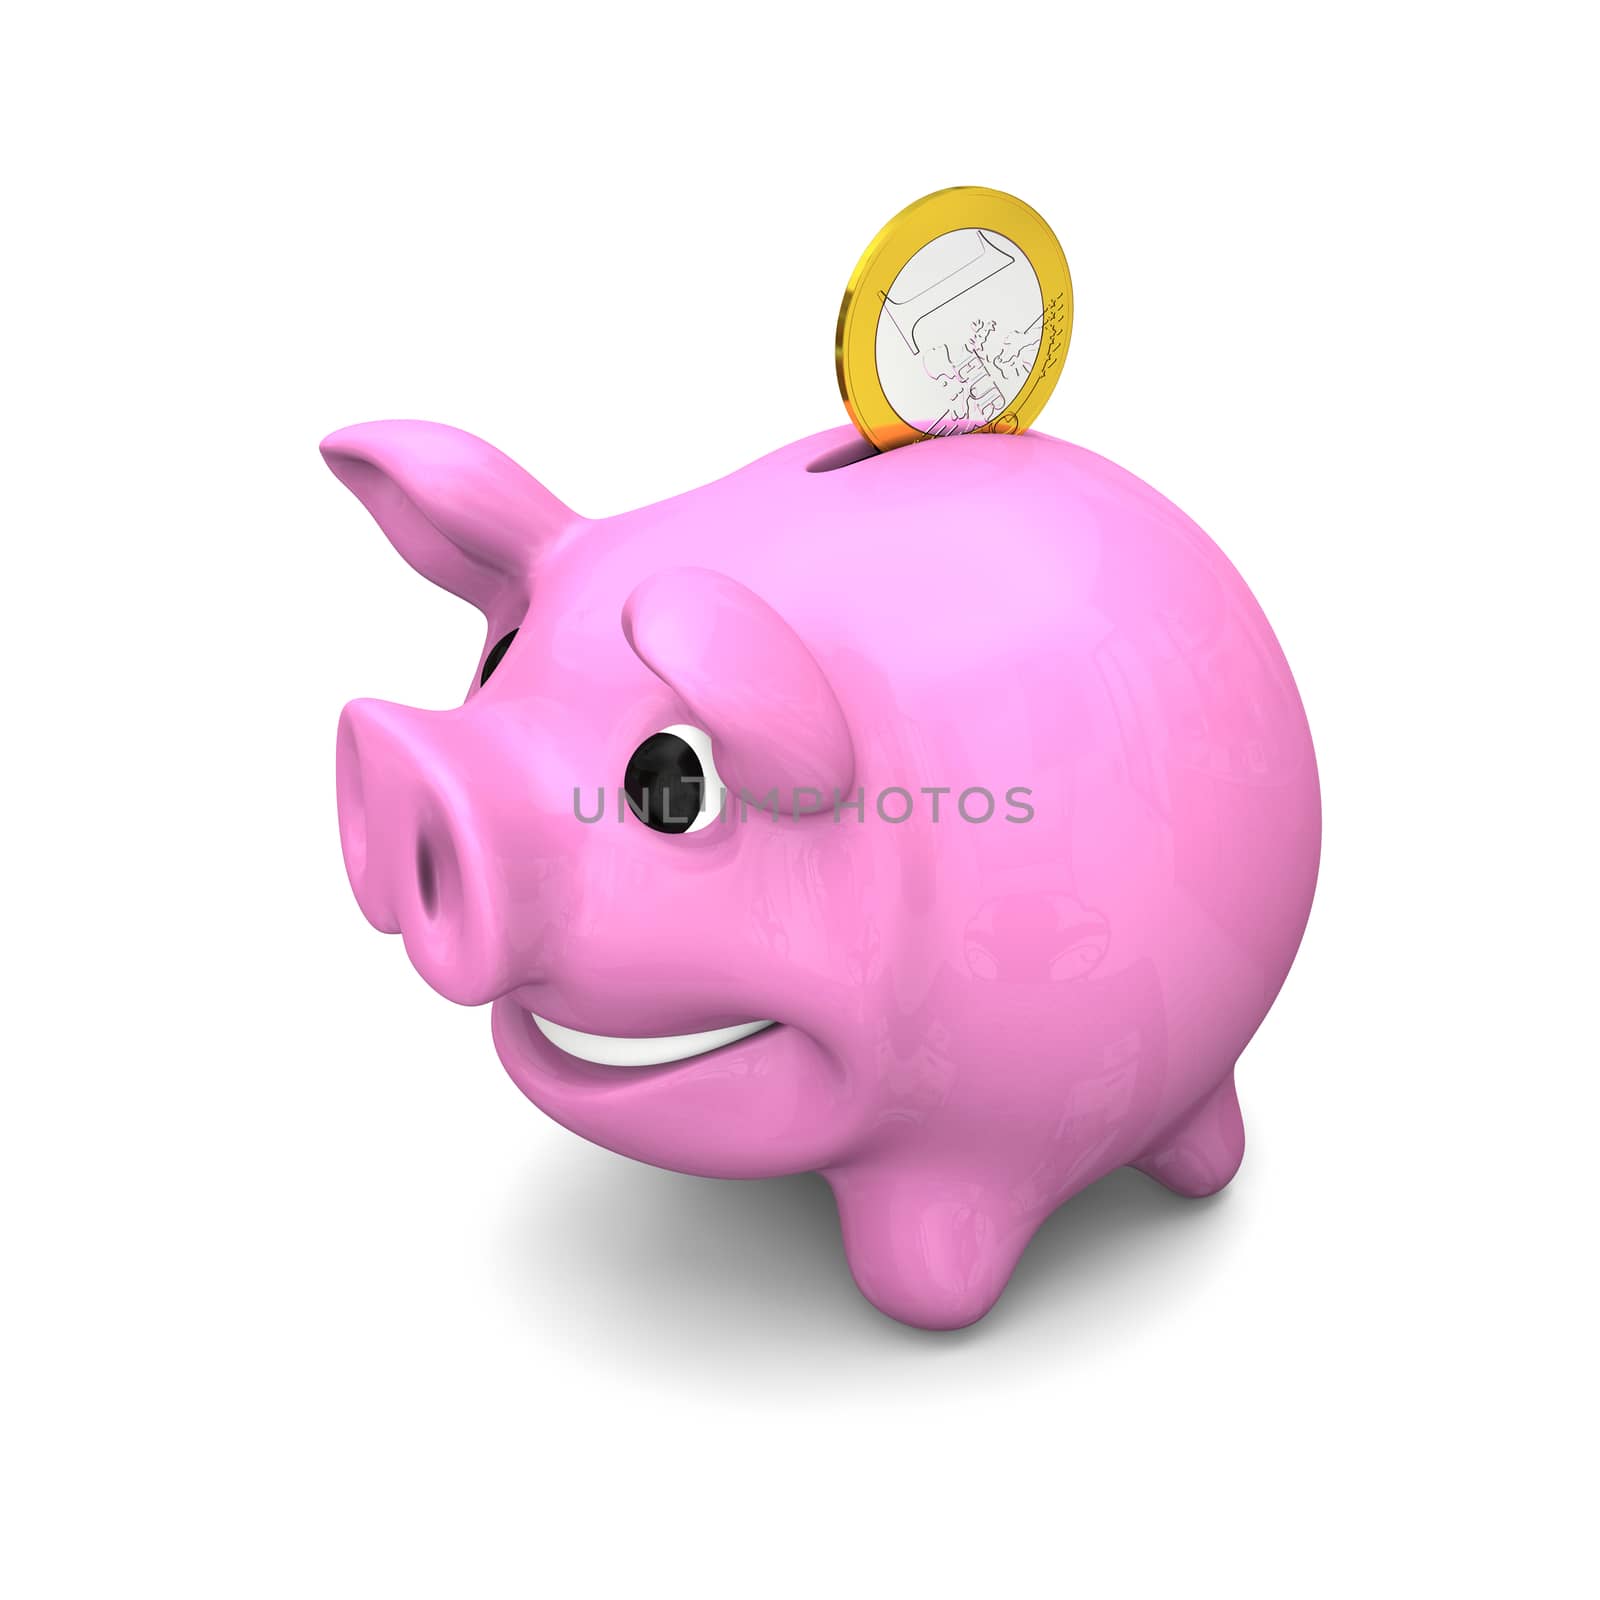 Euro coin falling into ceramic piggy bank, concept of savings and investments, isolated on white background